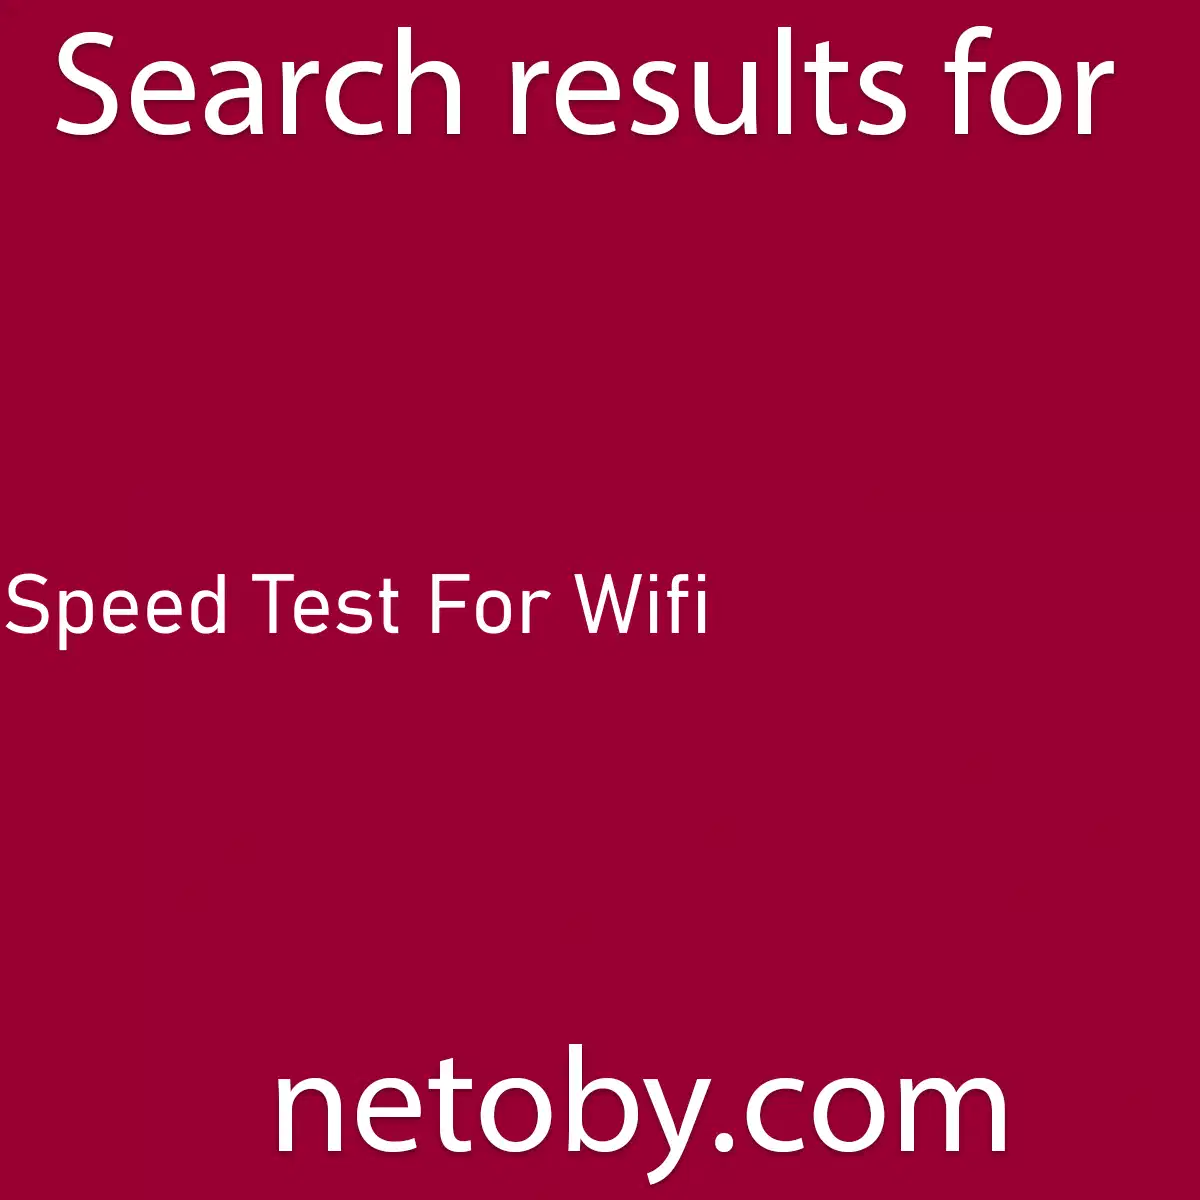 ﻿Speed Test For Wifi